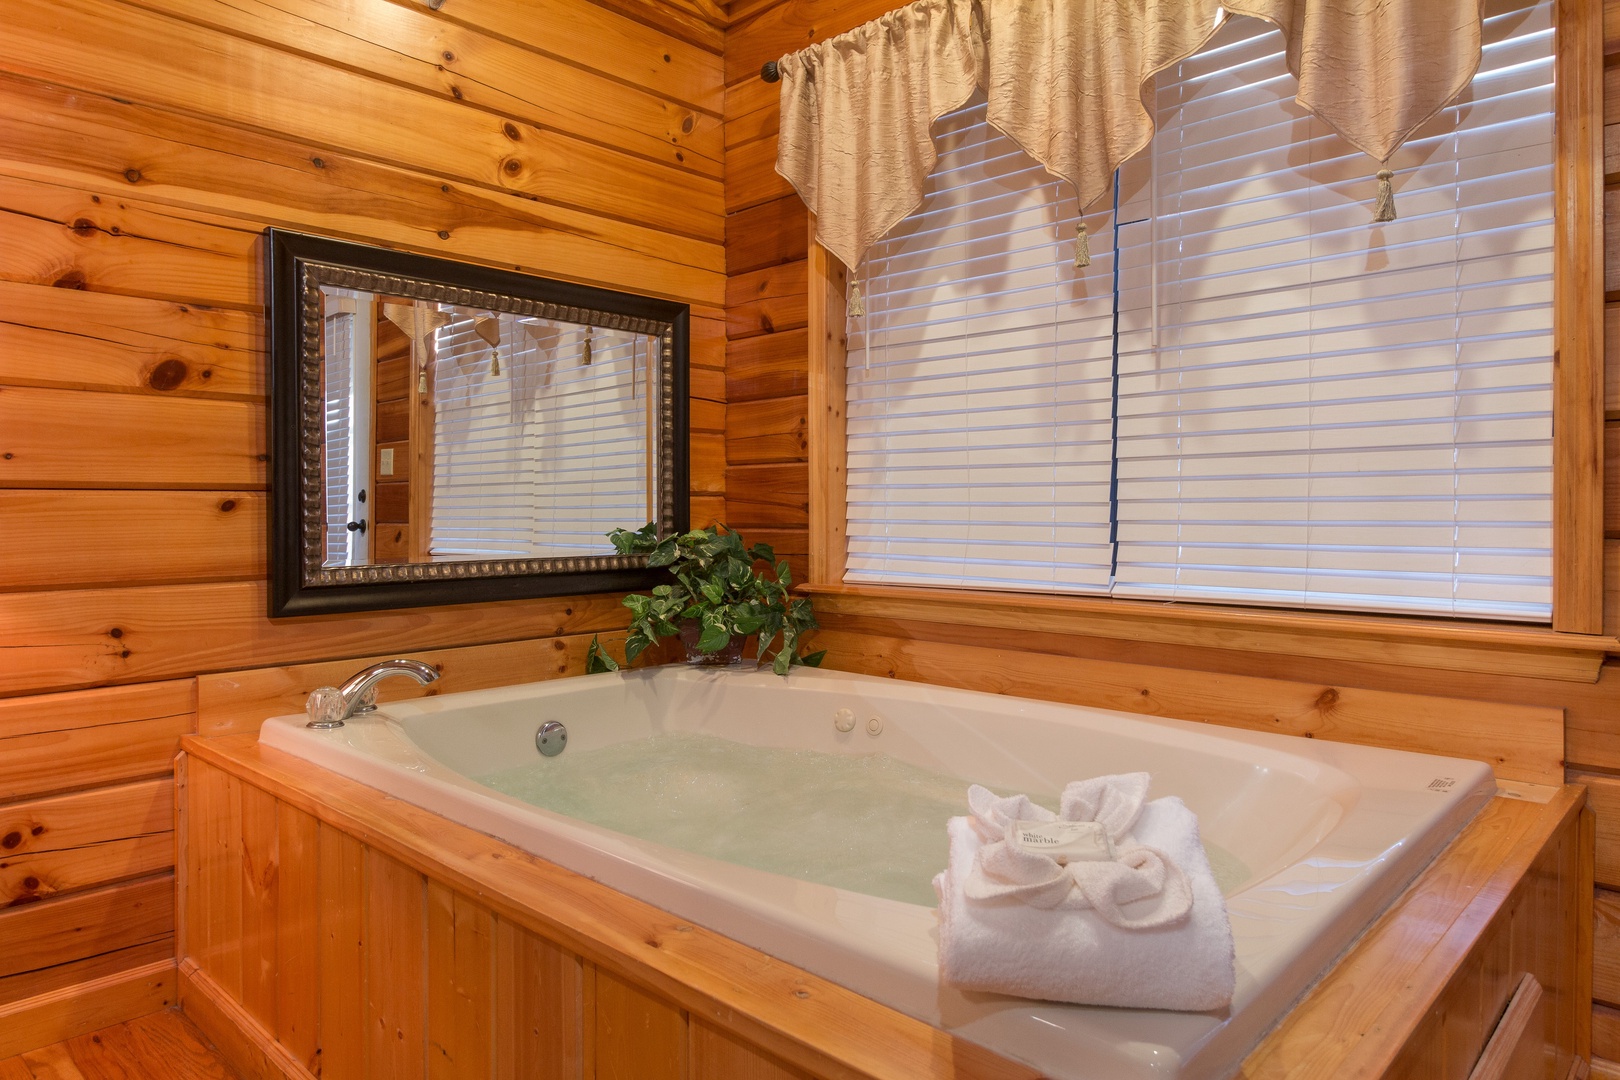 Jacuzzi at A Beary Cozy Escape, a 1 bedroom cabin rental located in Pigeon Forge